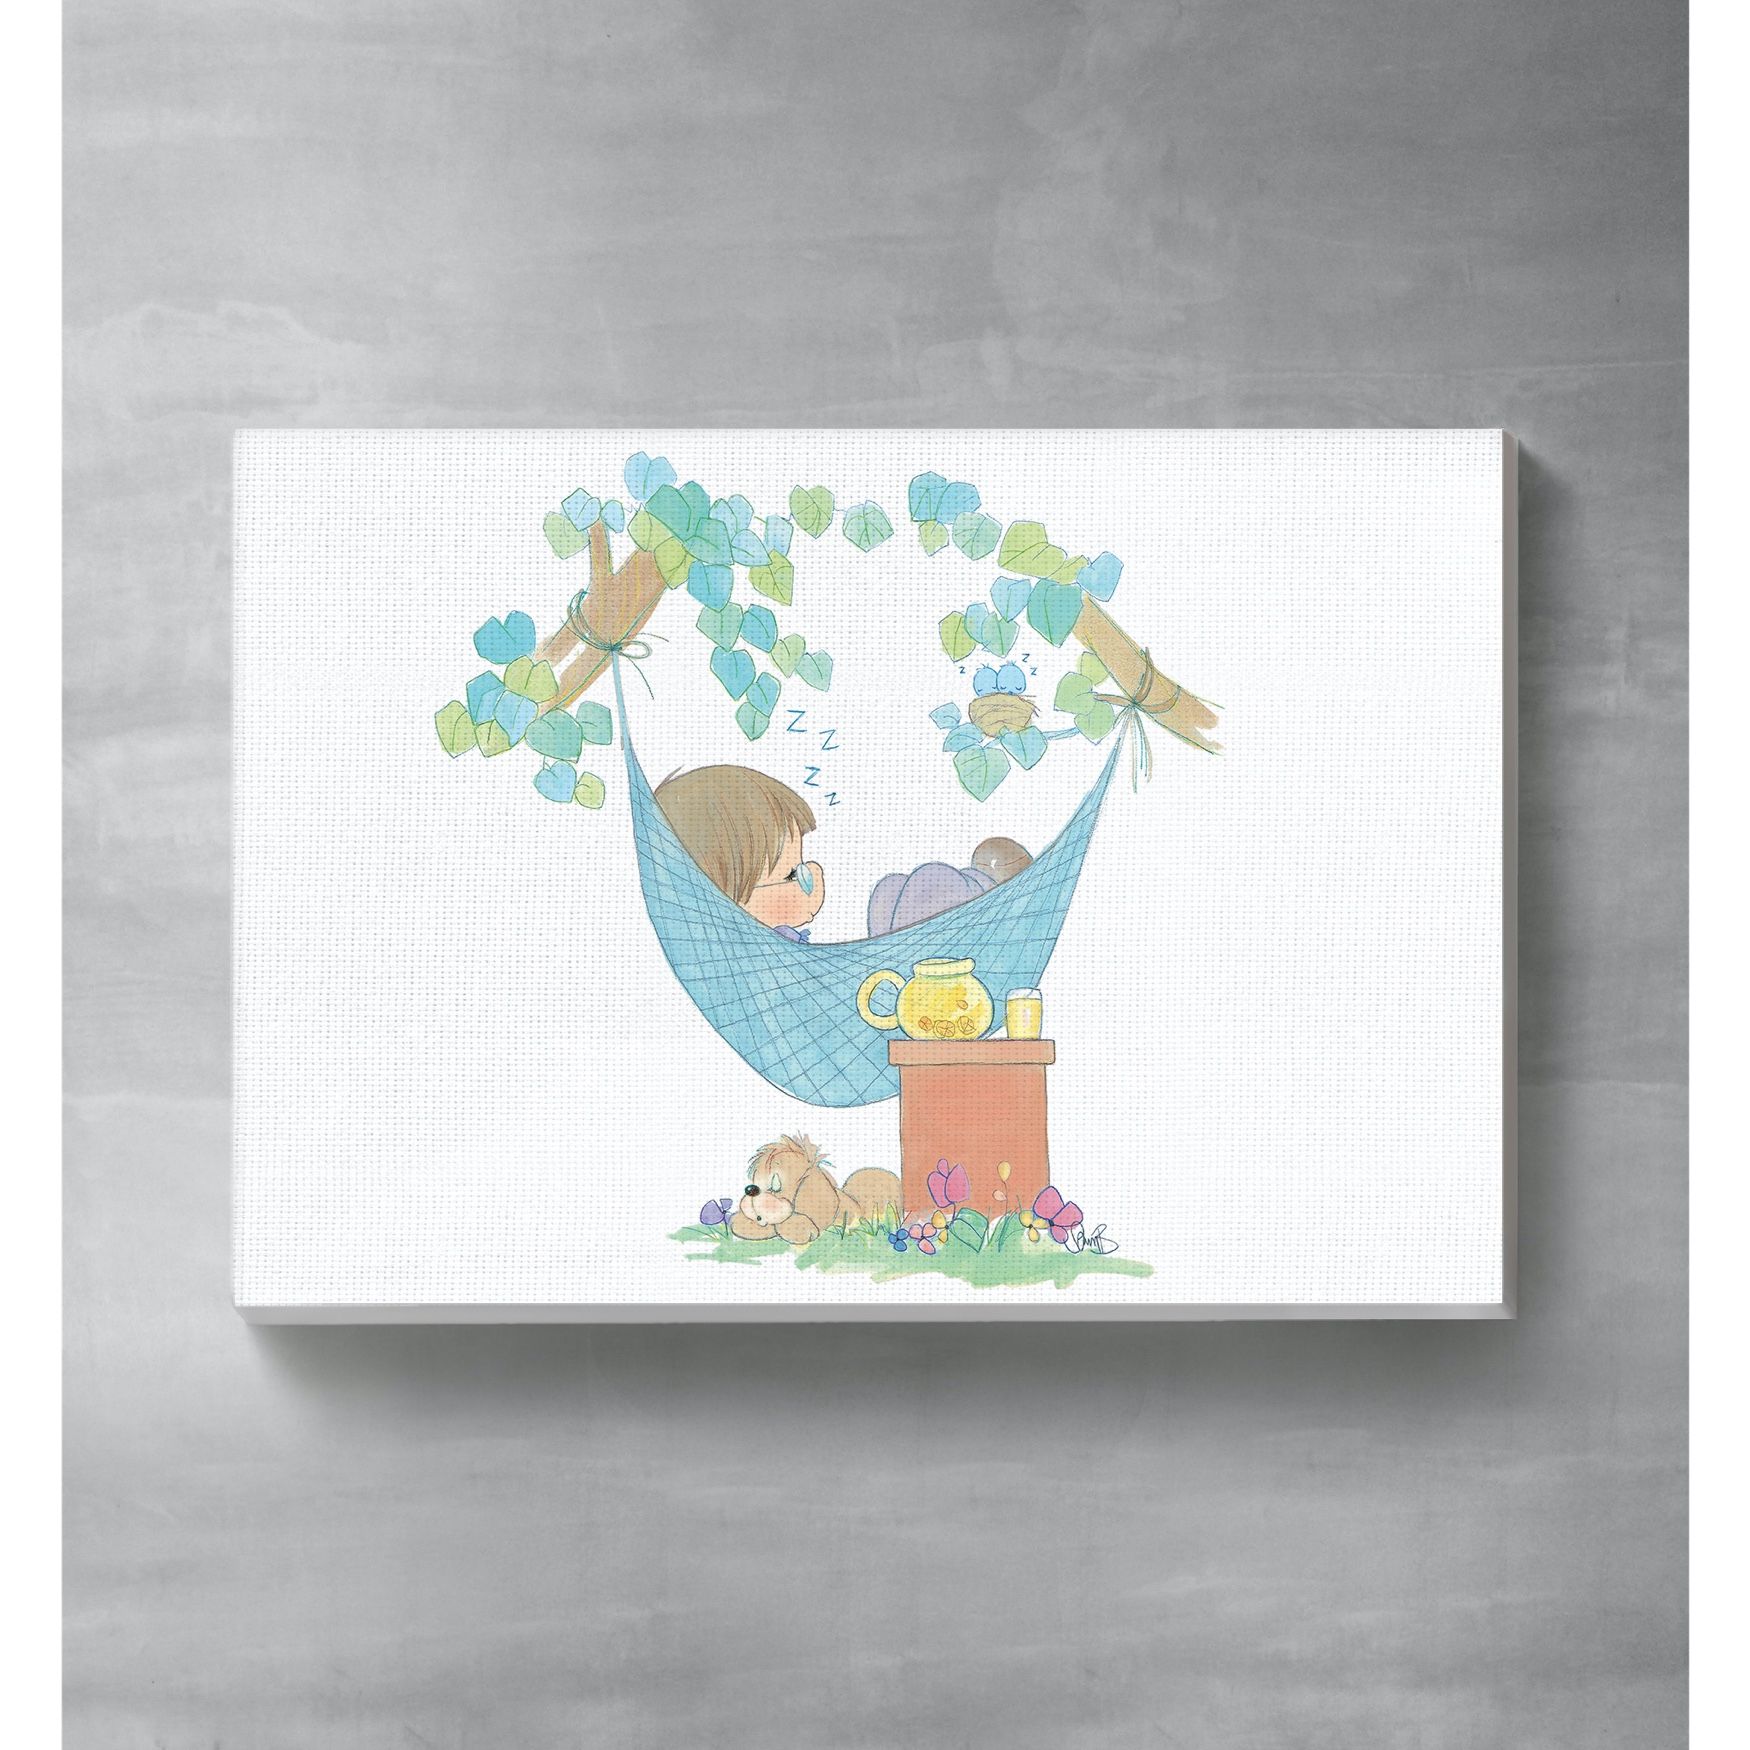 Lazy Days Of Summer Canvas Wall Art | Brylane Home With Regard To Summer Vista Wall Art (View 15 of 15)